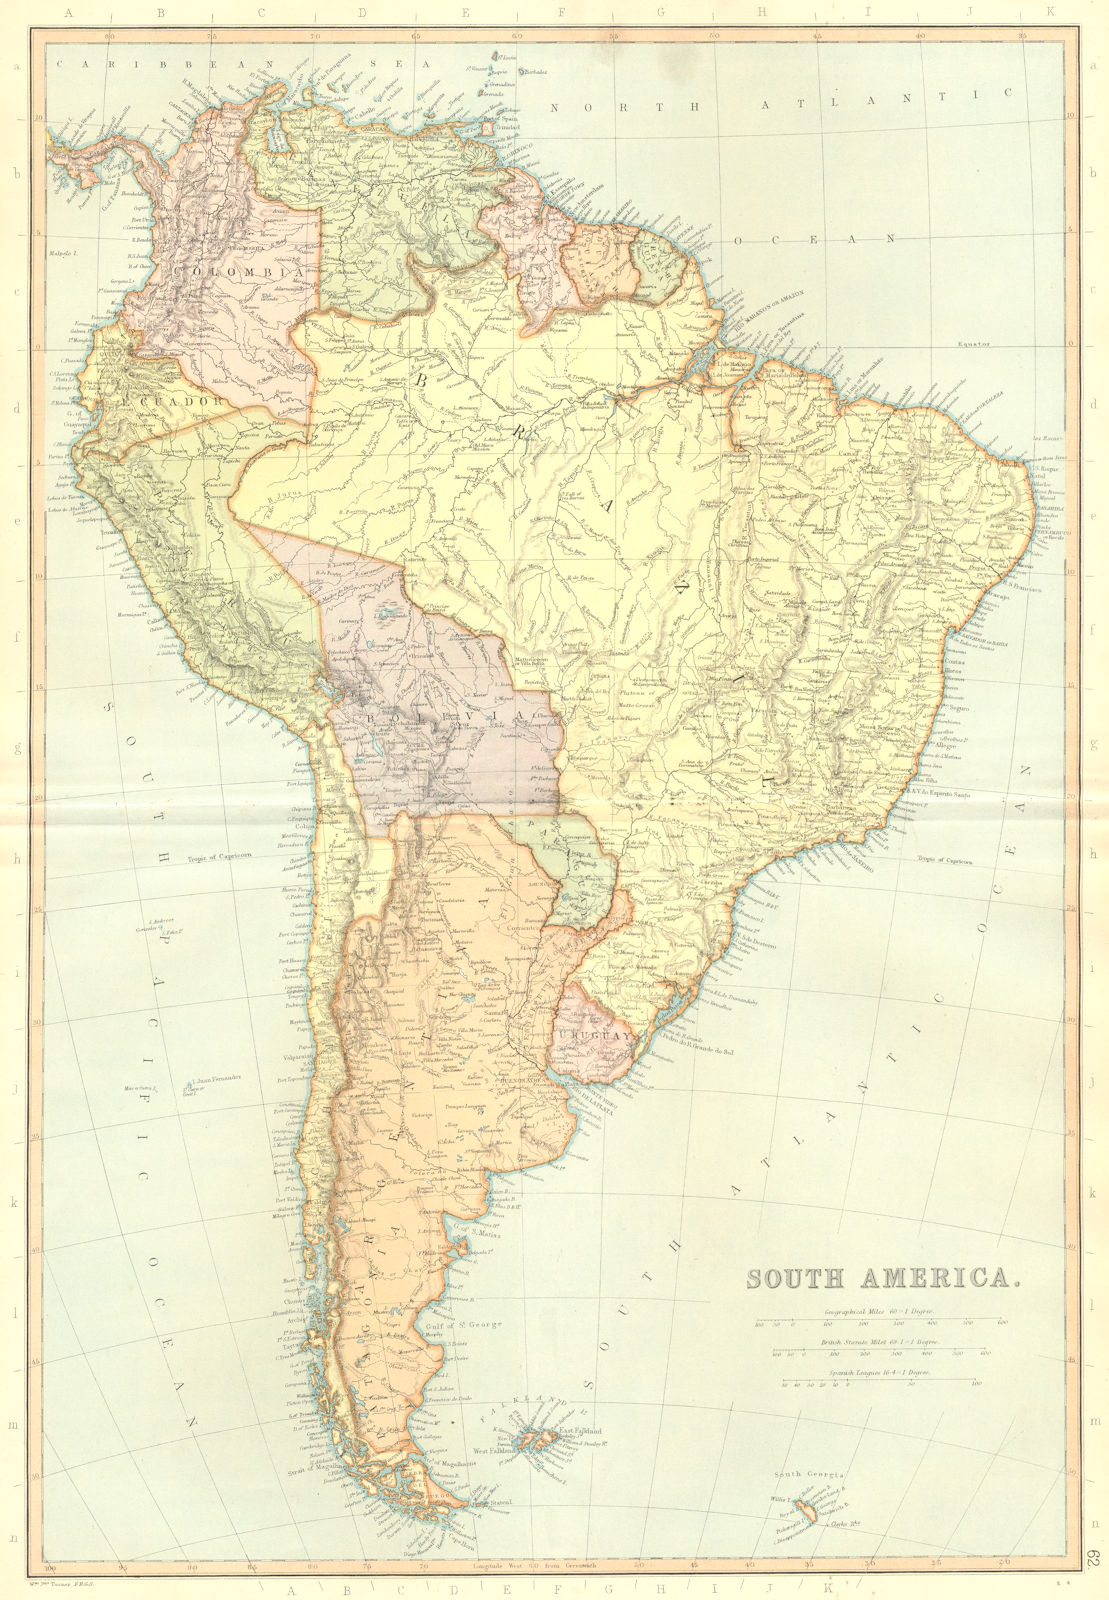 SOUTH AMERICA. Brazil Argentina Chile.Scale = Spanish Leagues.BLACKIE 1893 map